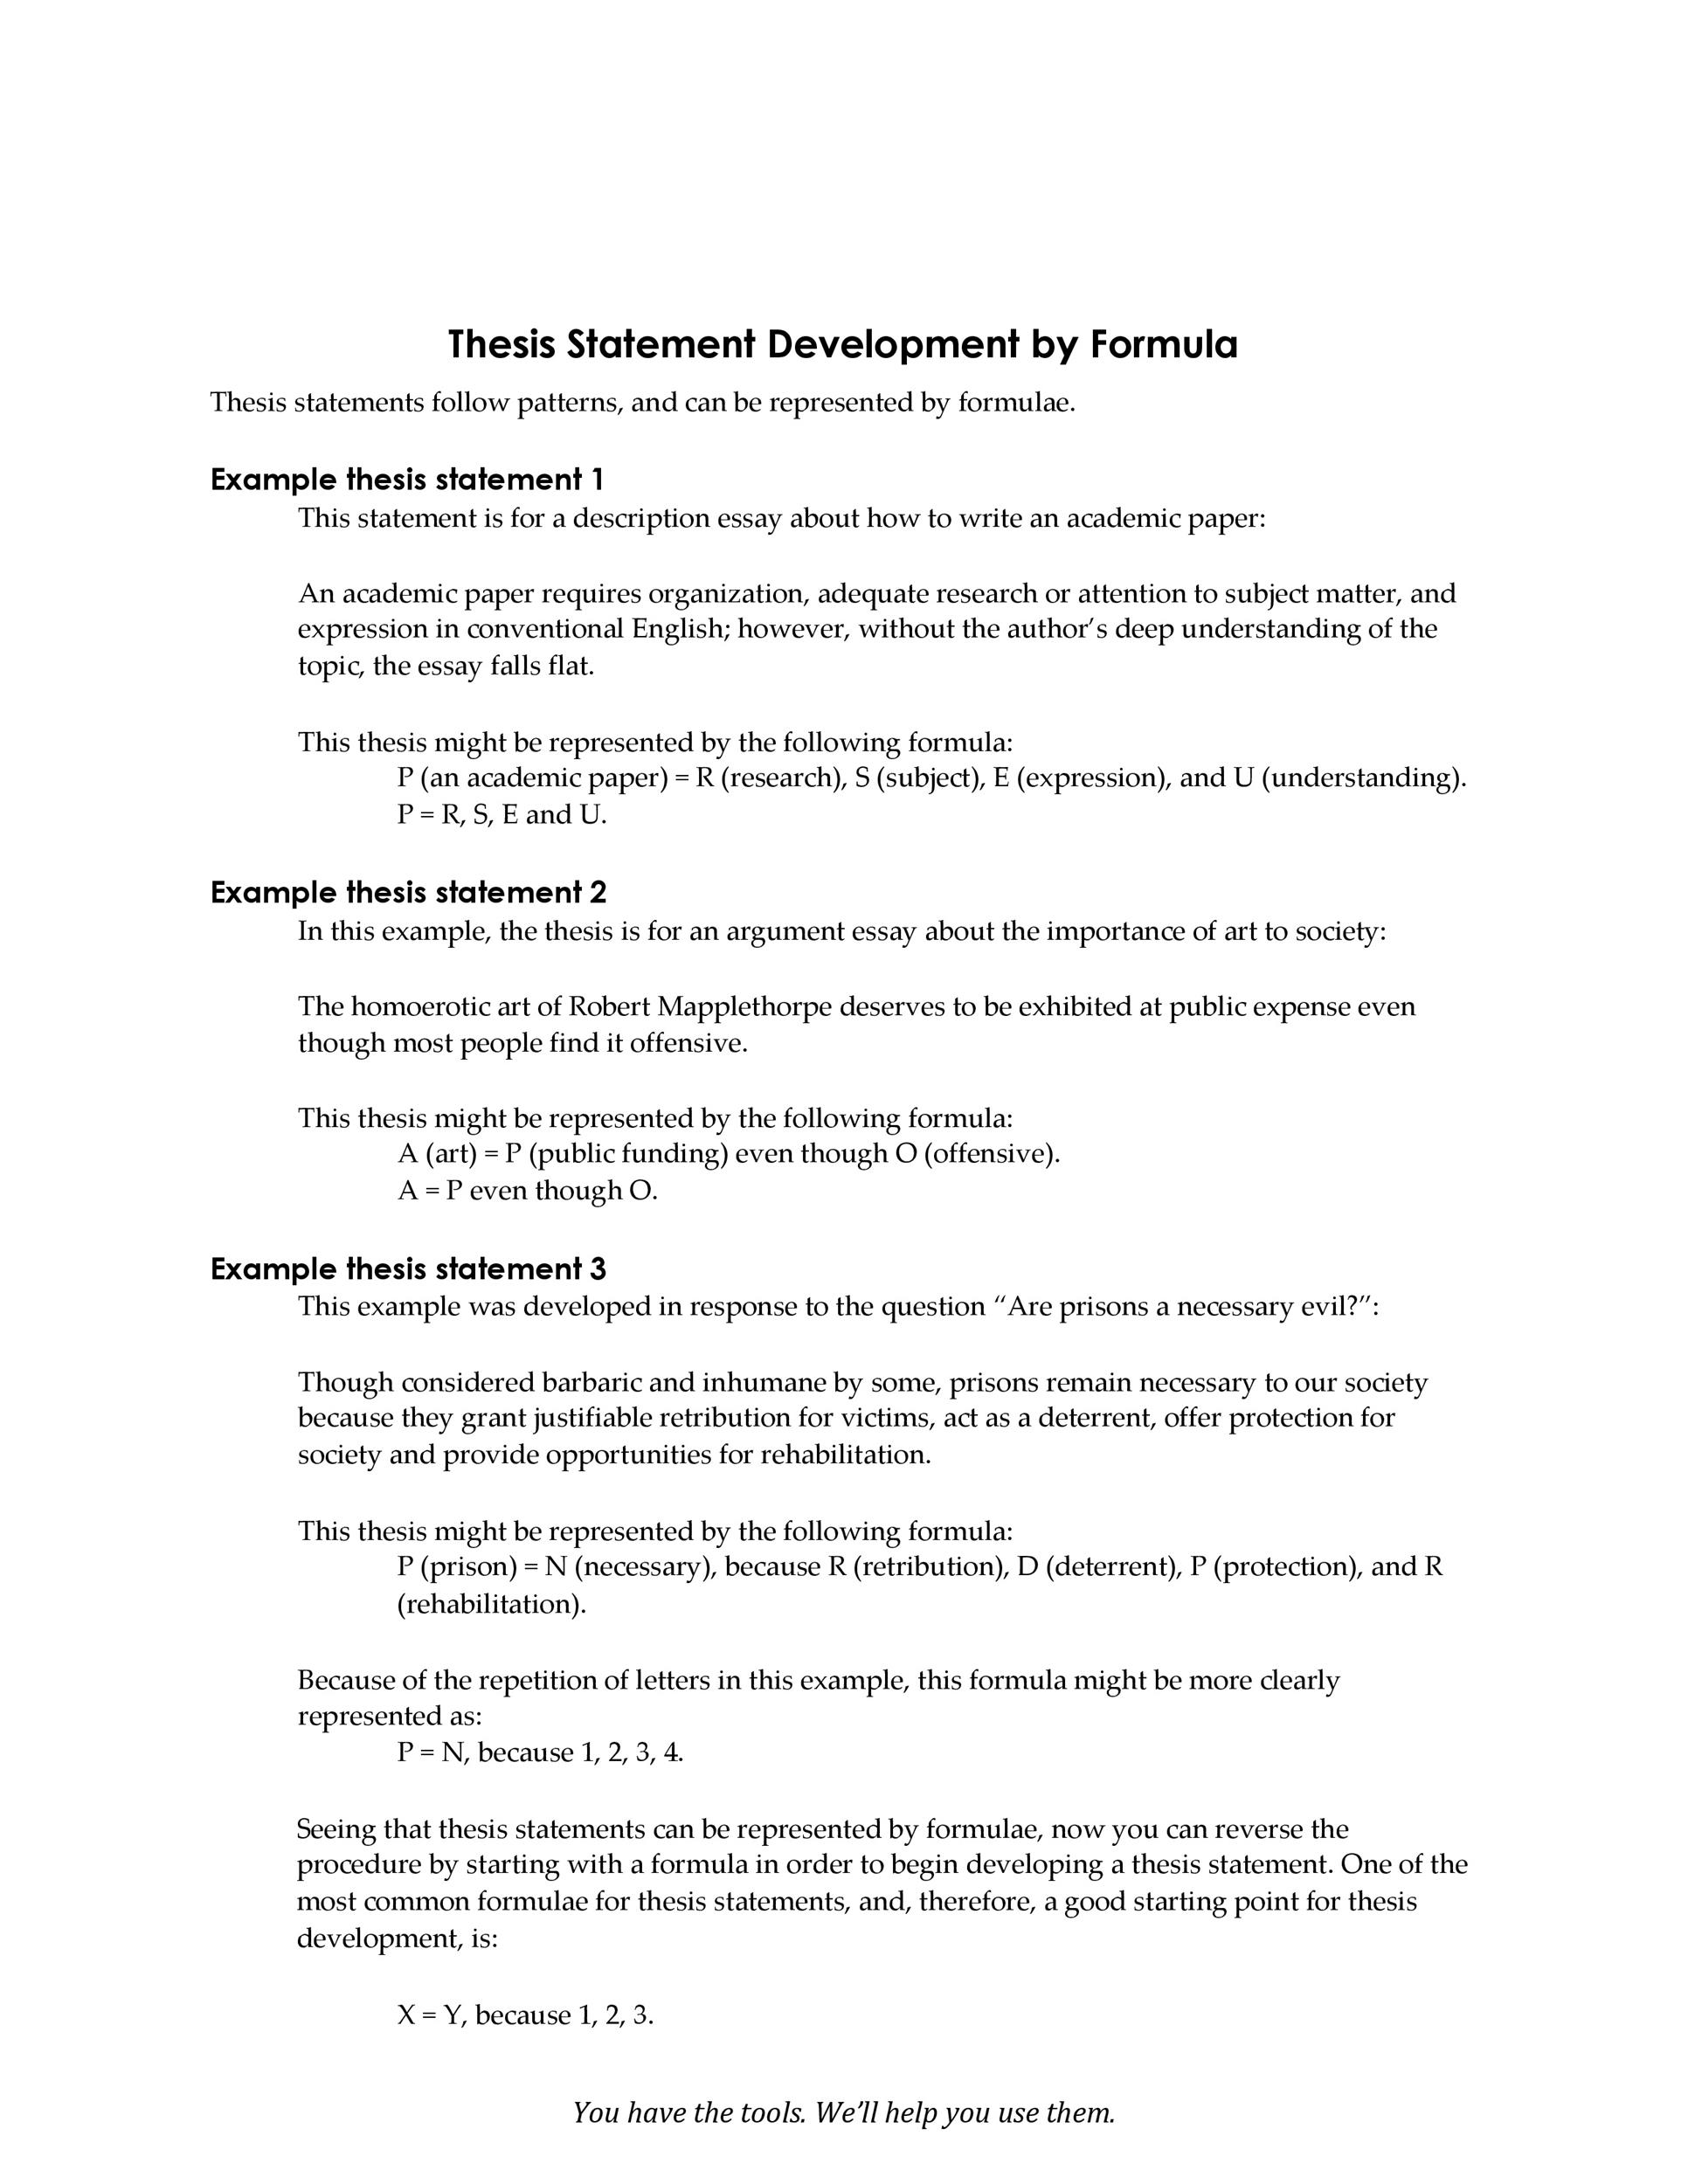 Free thesis statement template 04